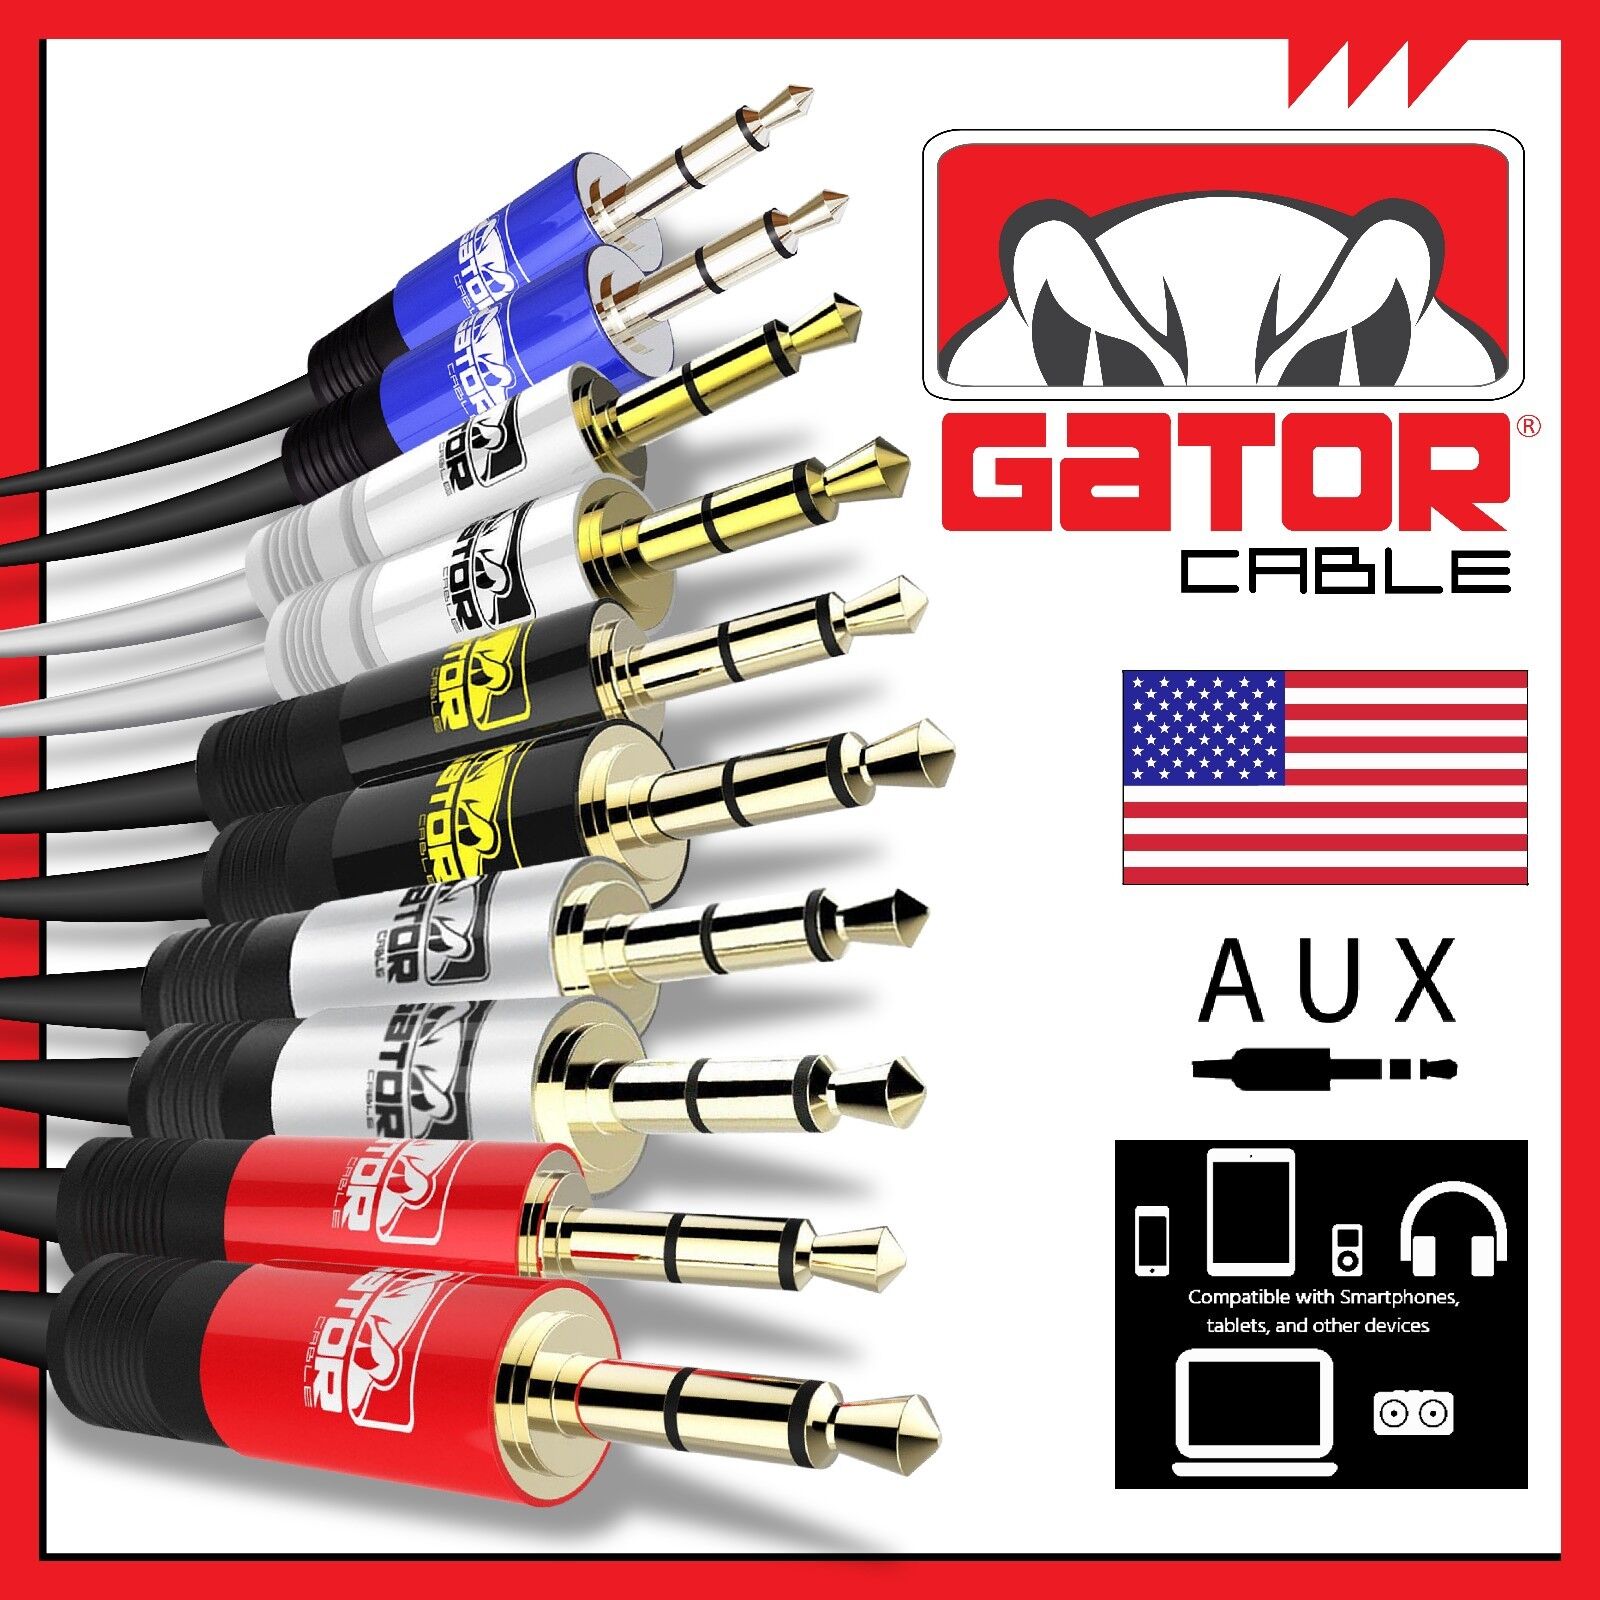 AUX 3.5mm Audio Cable Cord Male to Male For Phone iPhone Samsung LG Earphones Gator Cable AUX-3.5mm-Male-to-Male - фотография #2